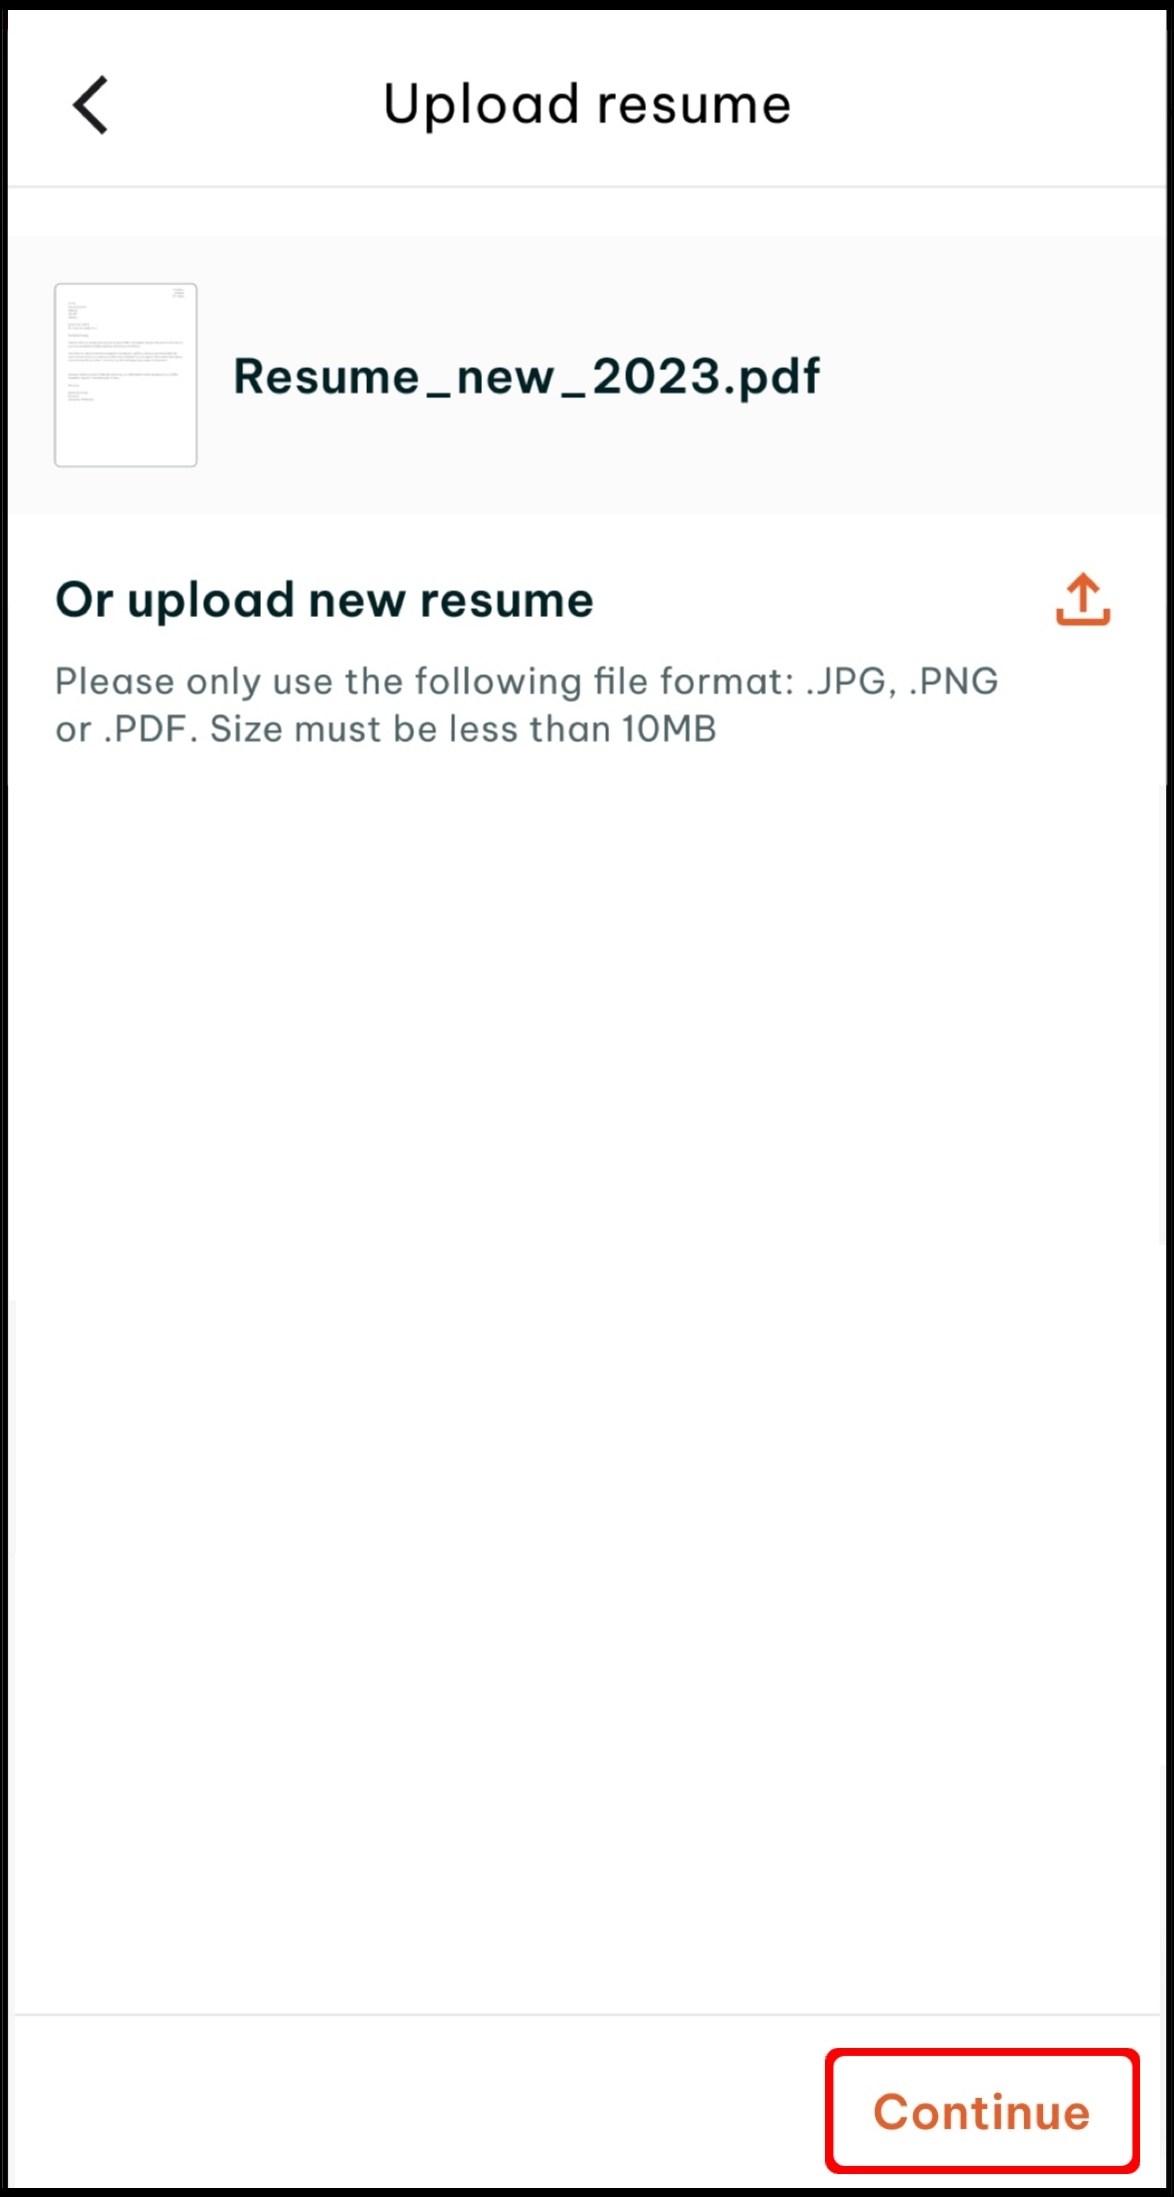 screenshot of the upload resume page, highlighting the continue button